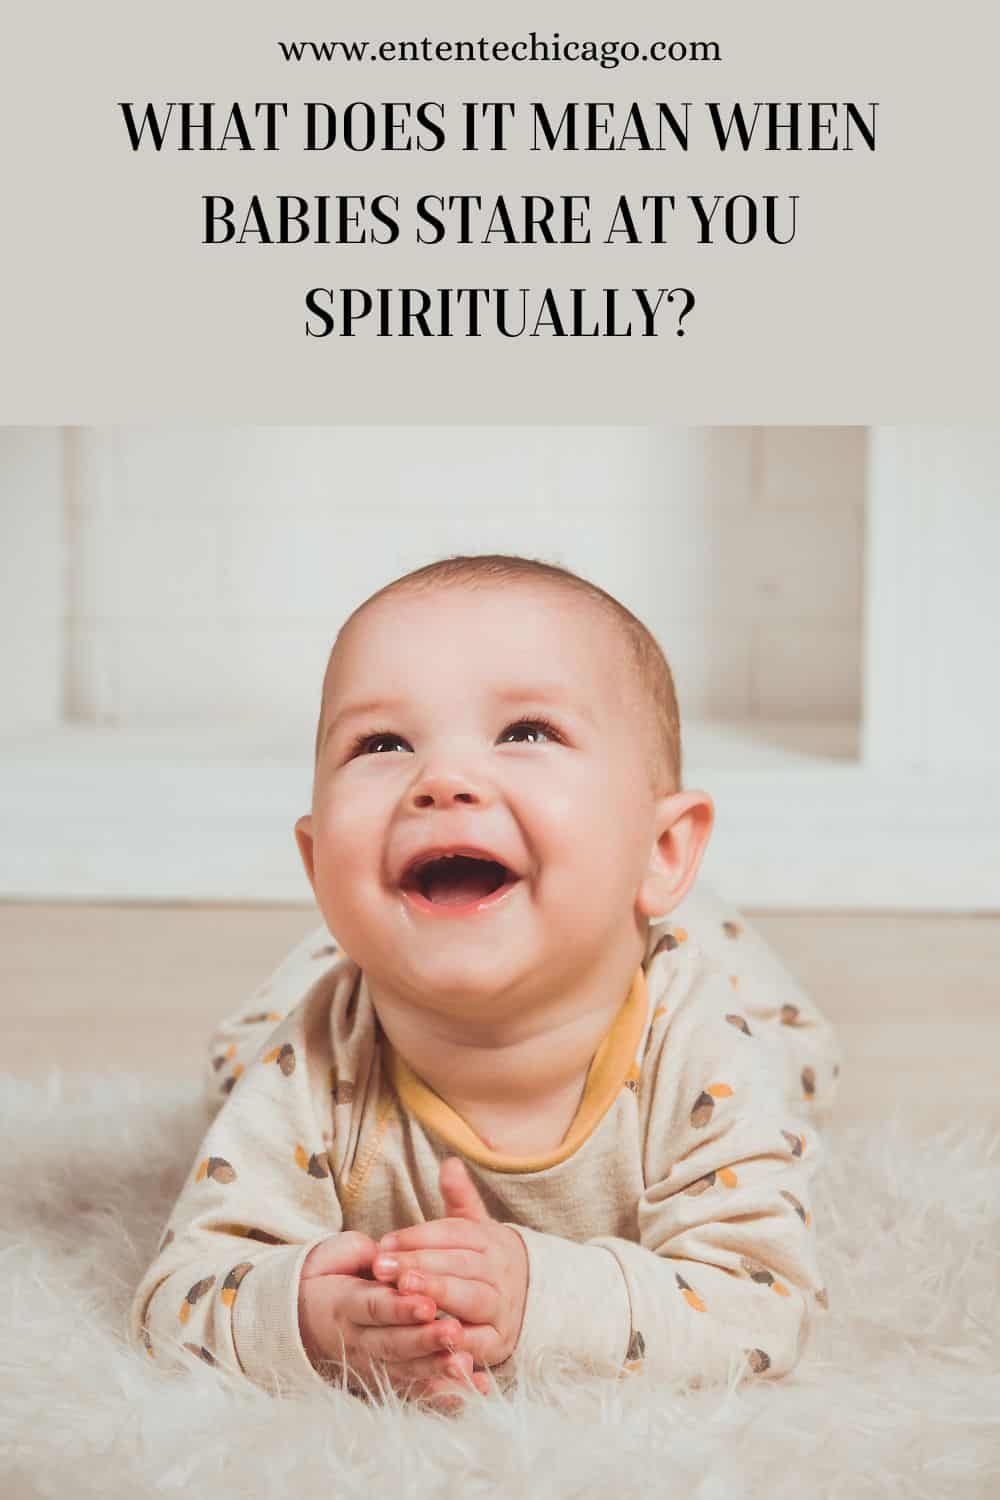 What Does It Mean When Babies Stare At You Spiritually?